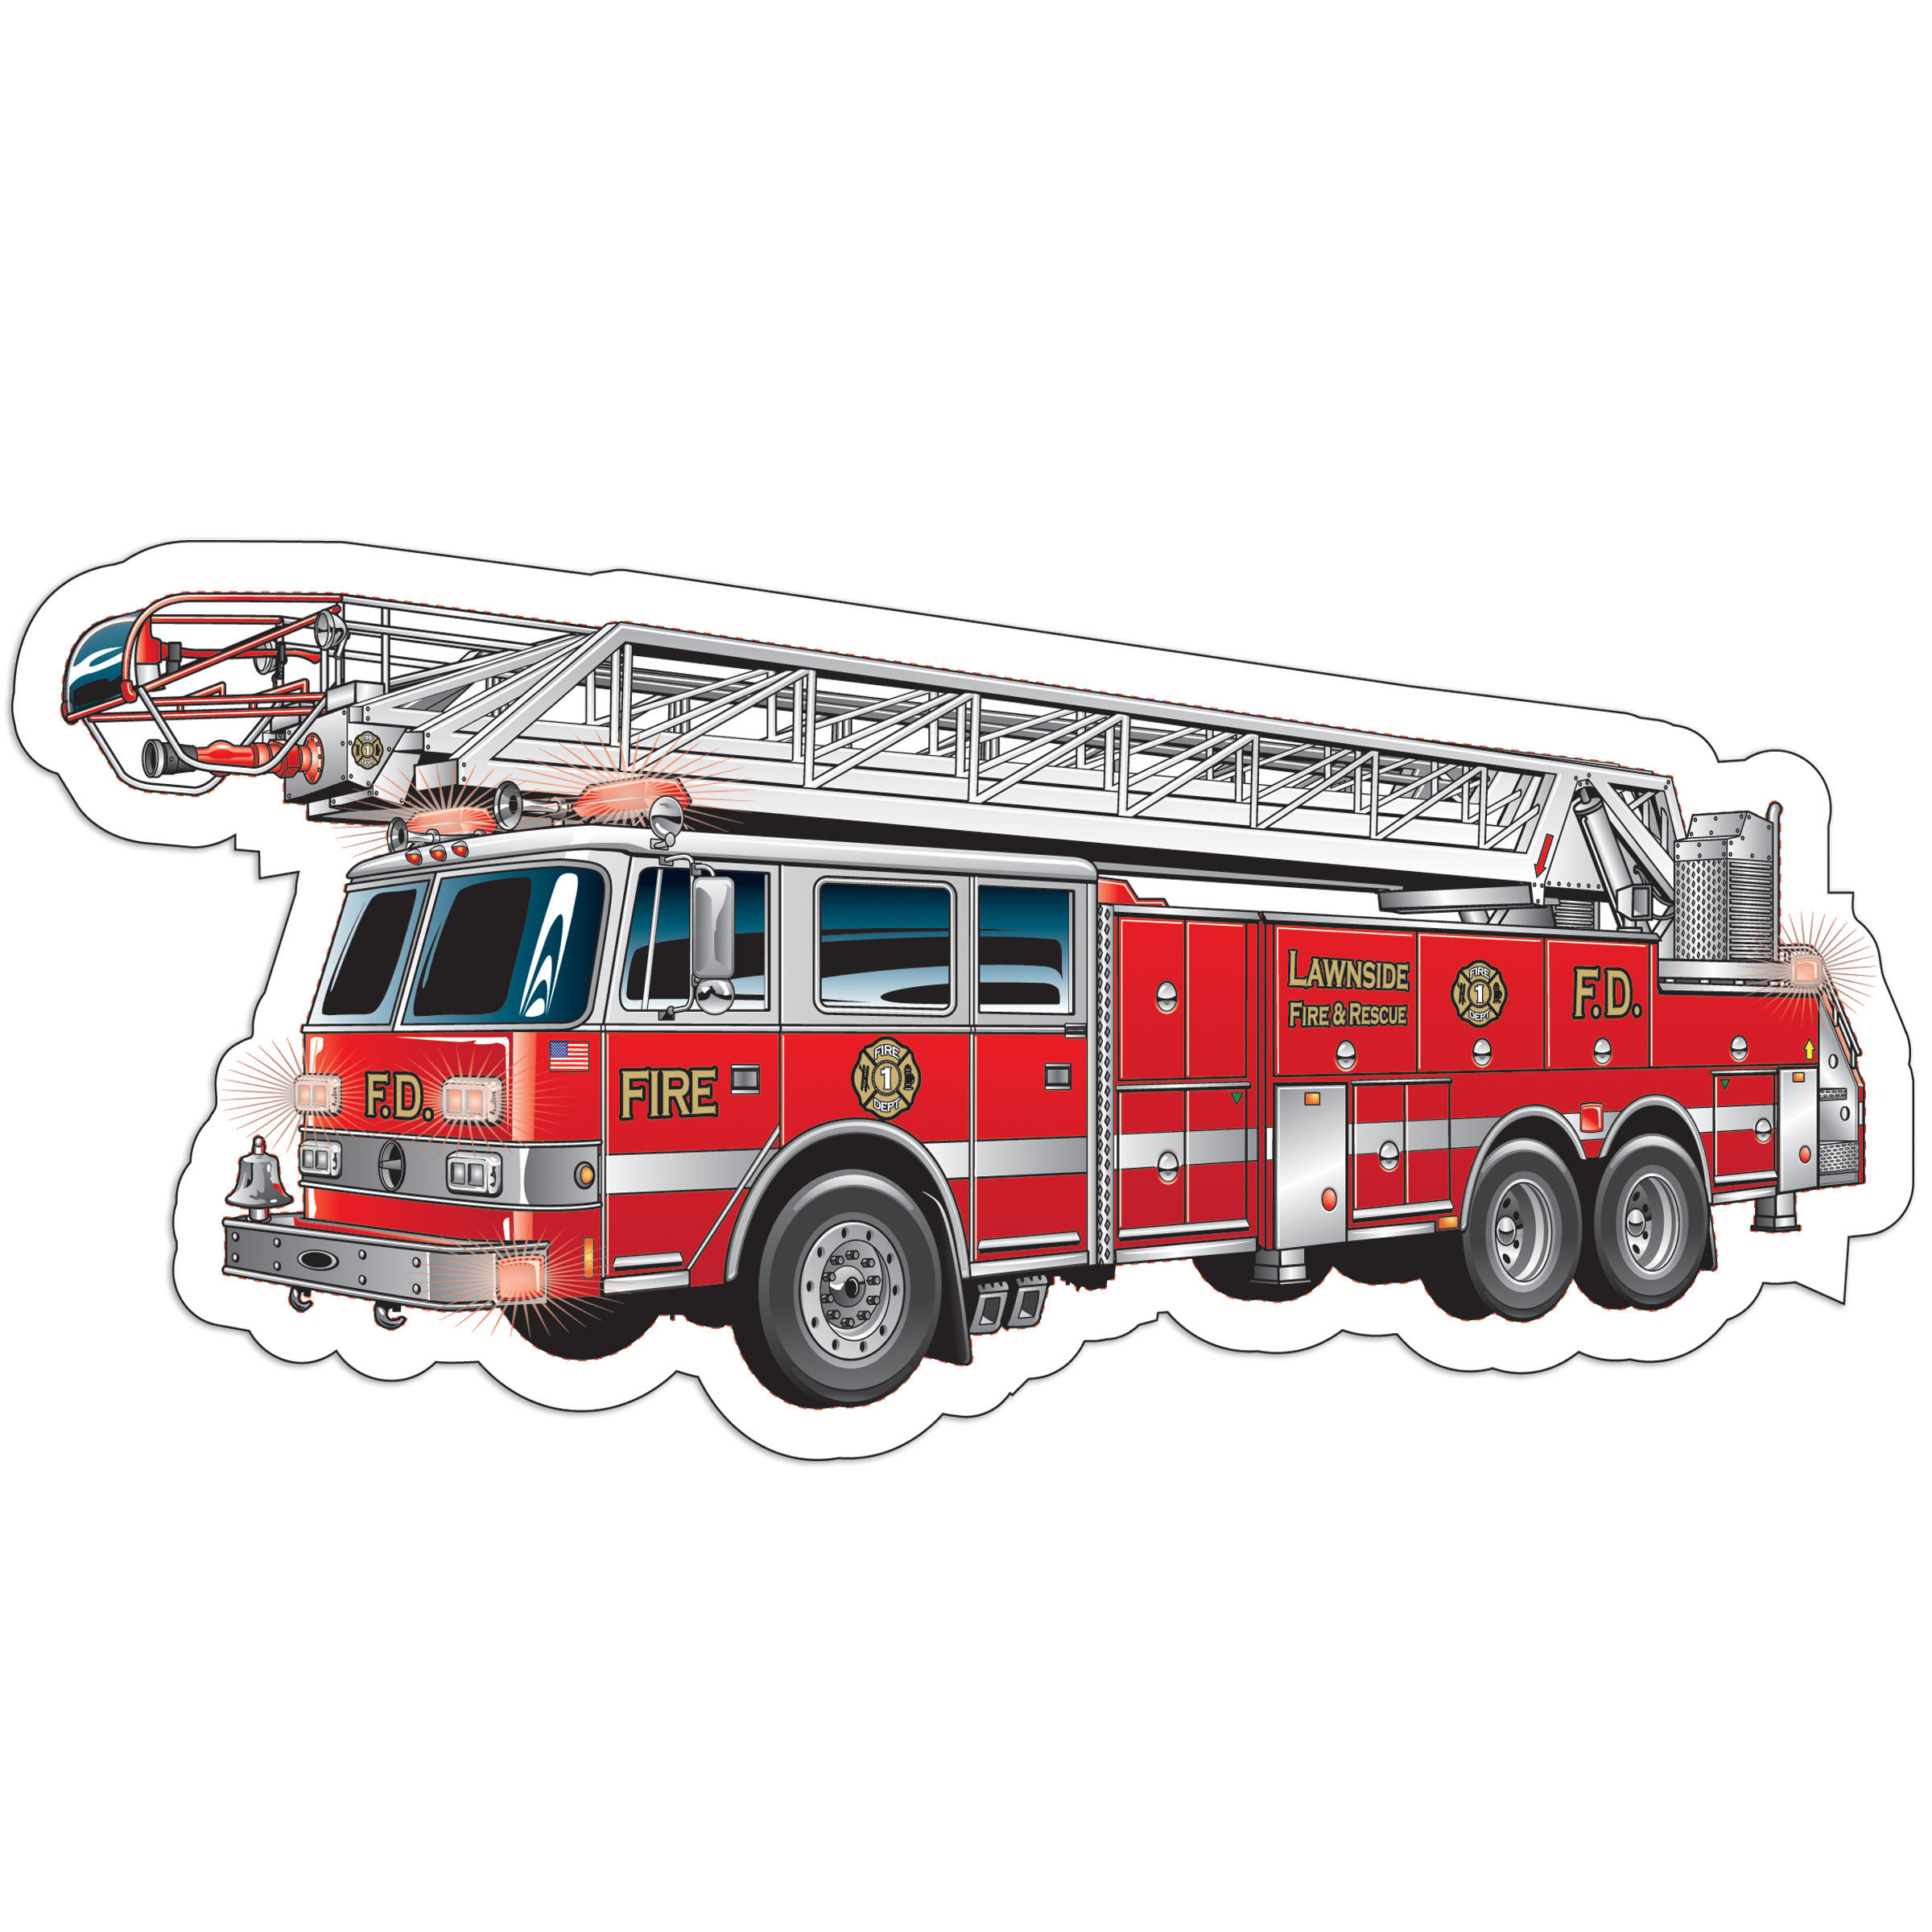 FIRE CHIEF Magnetic Vehicle Signs to fit car truck SUV van Fire Truck Volunteer 